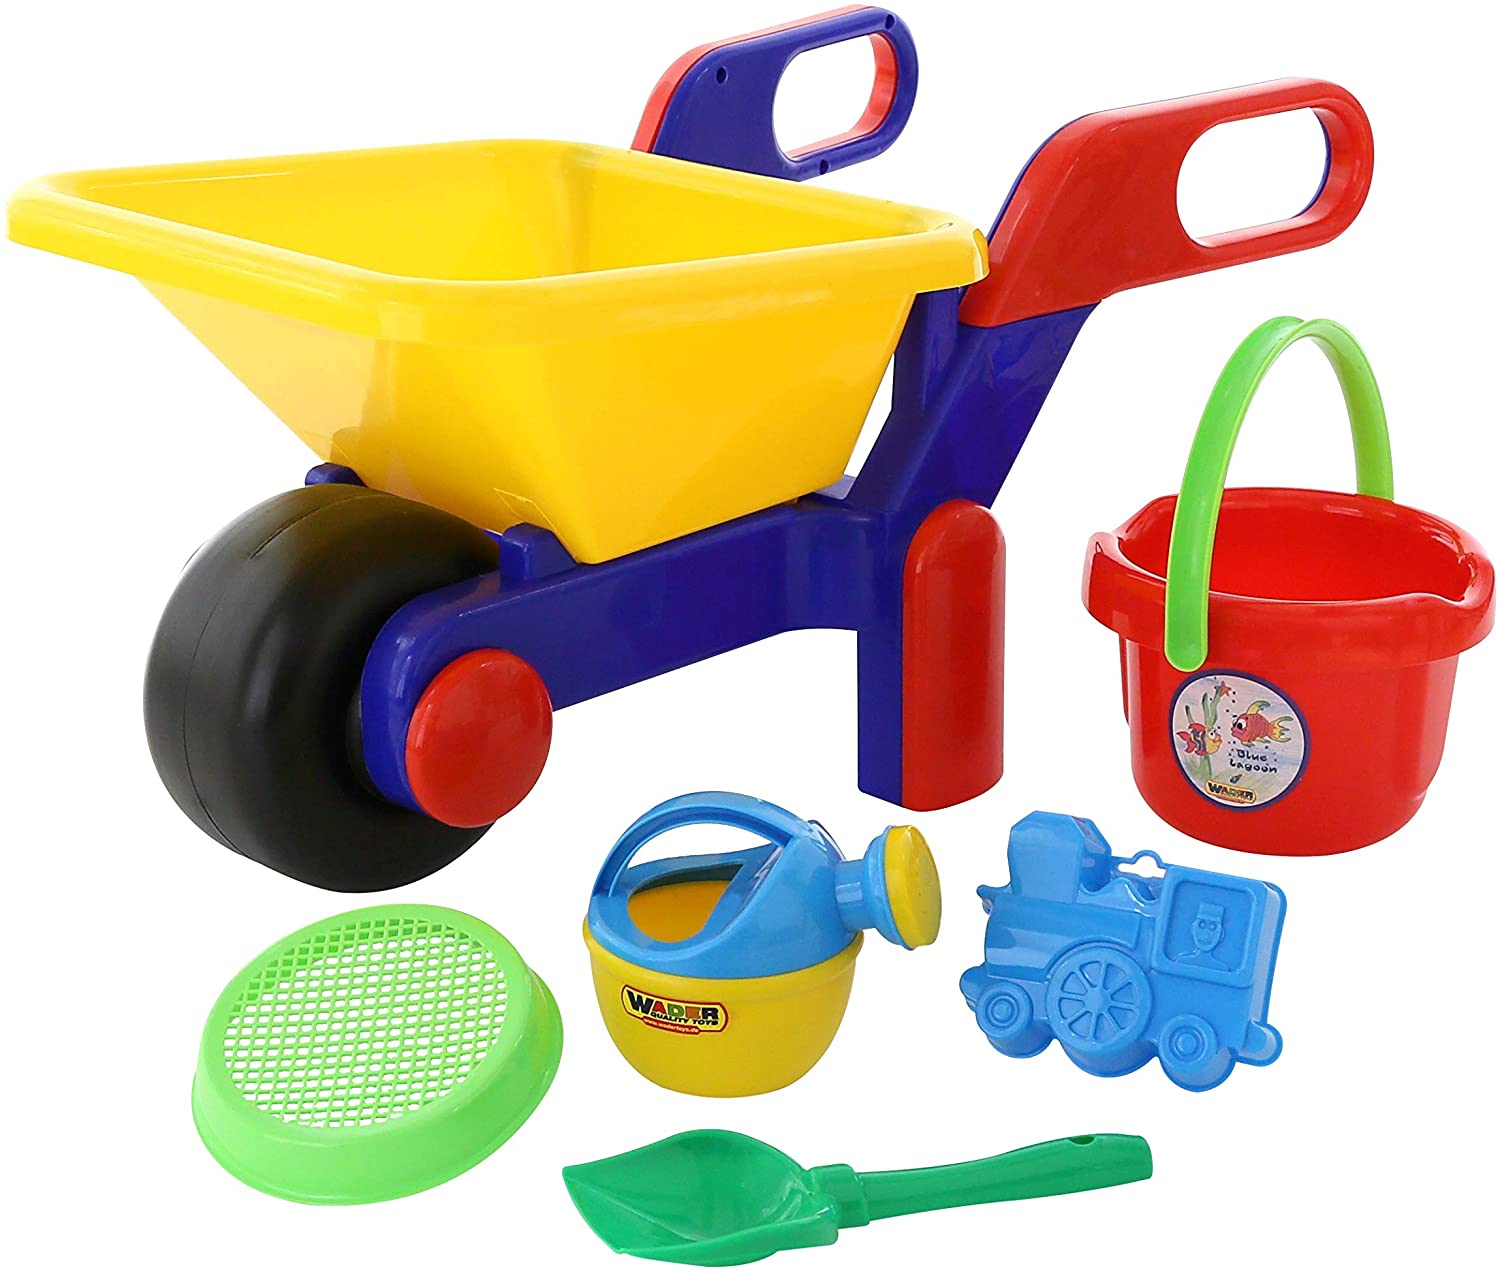 Wader Quality Toys Wader 41838 No. 455: Barrow And Bucket Set Large, Sieve, Moulds And Waterin